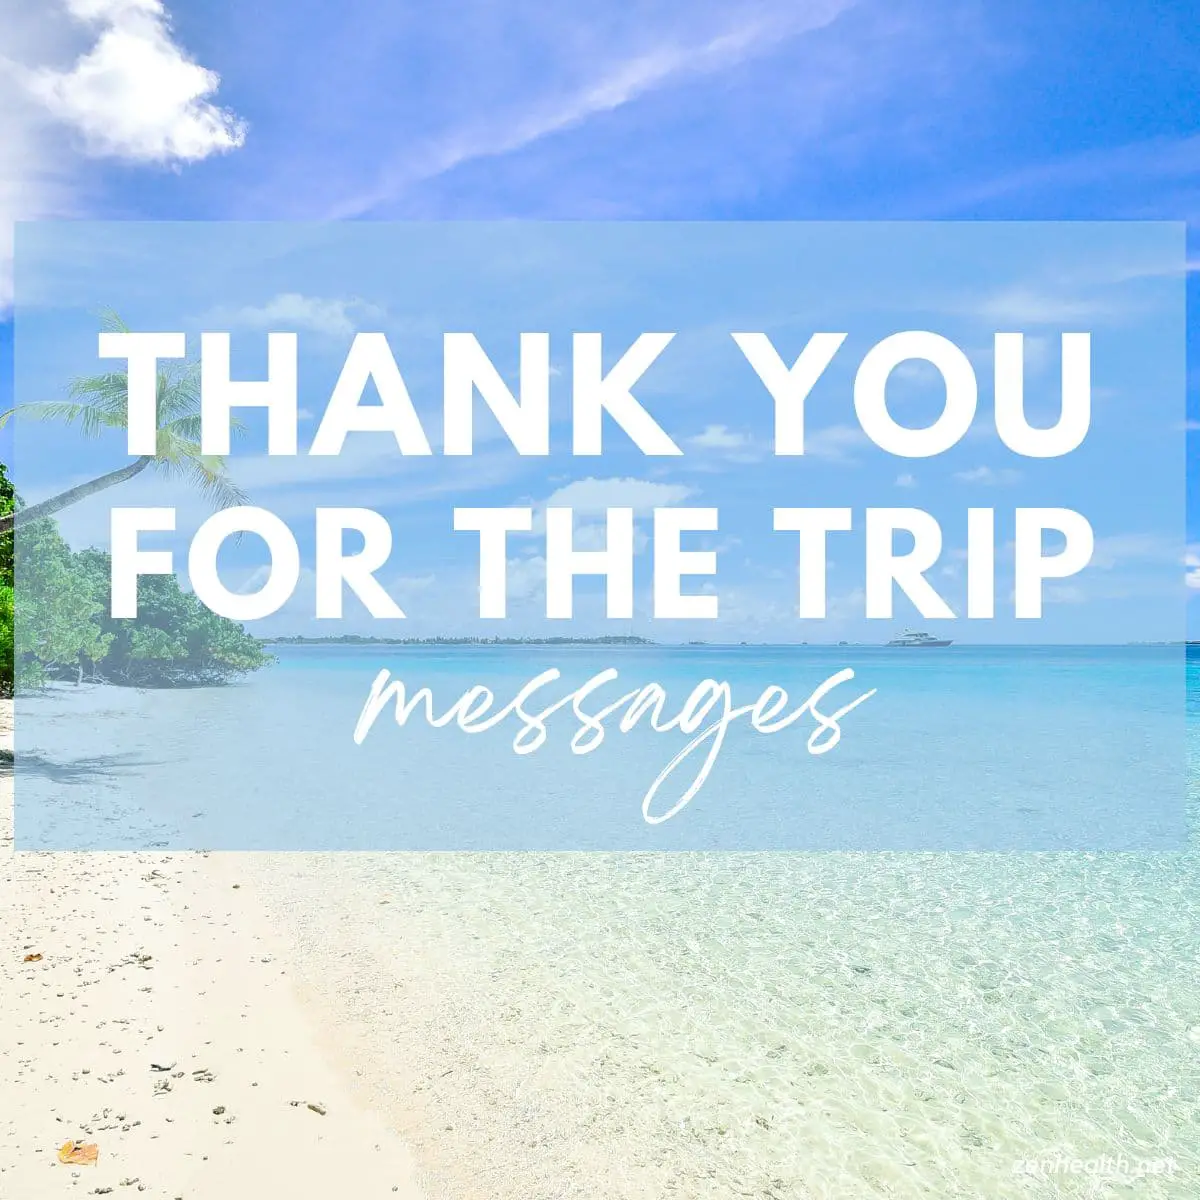 thank you for the trip messages text overlay on a photo of a beautiful beach with trees on the left side